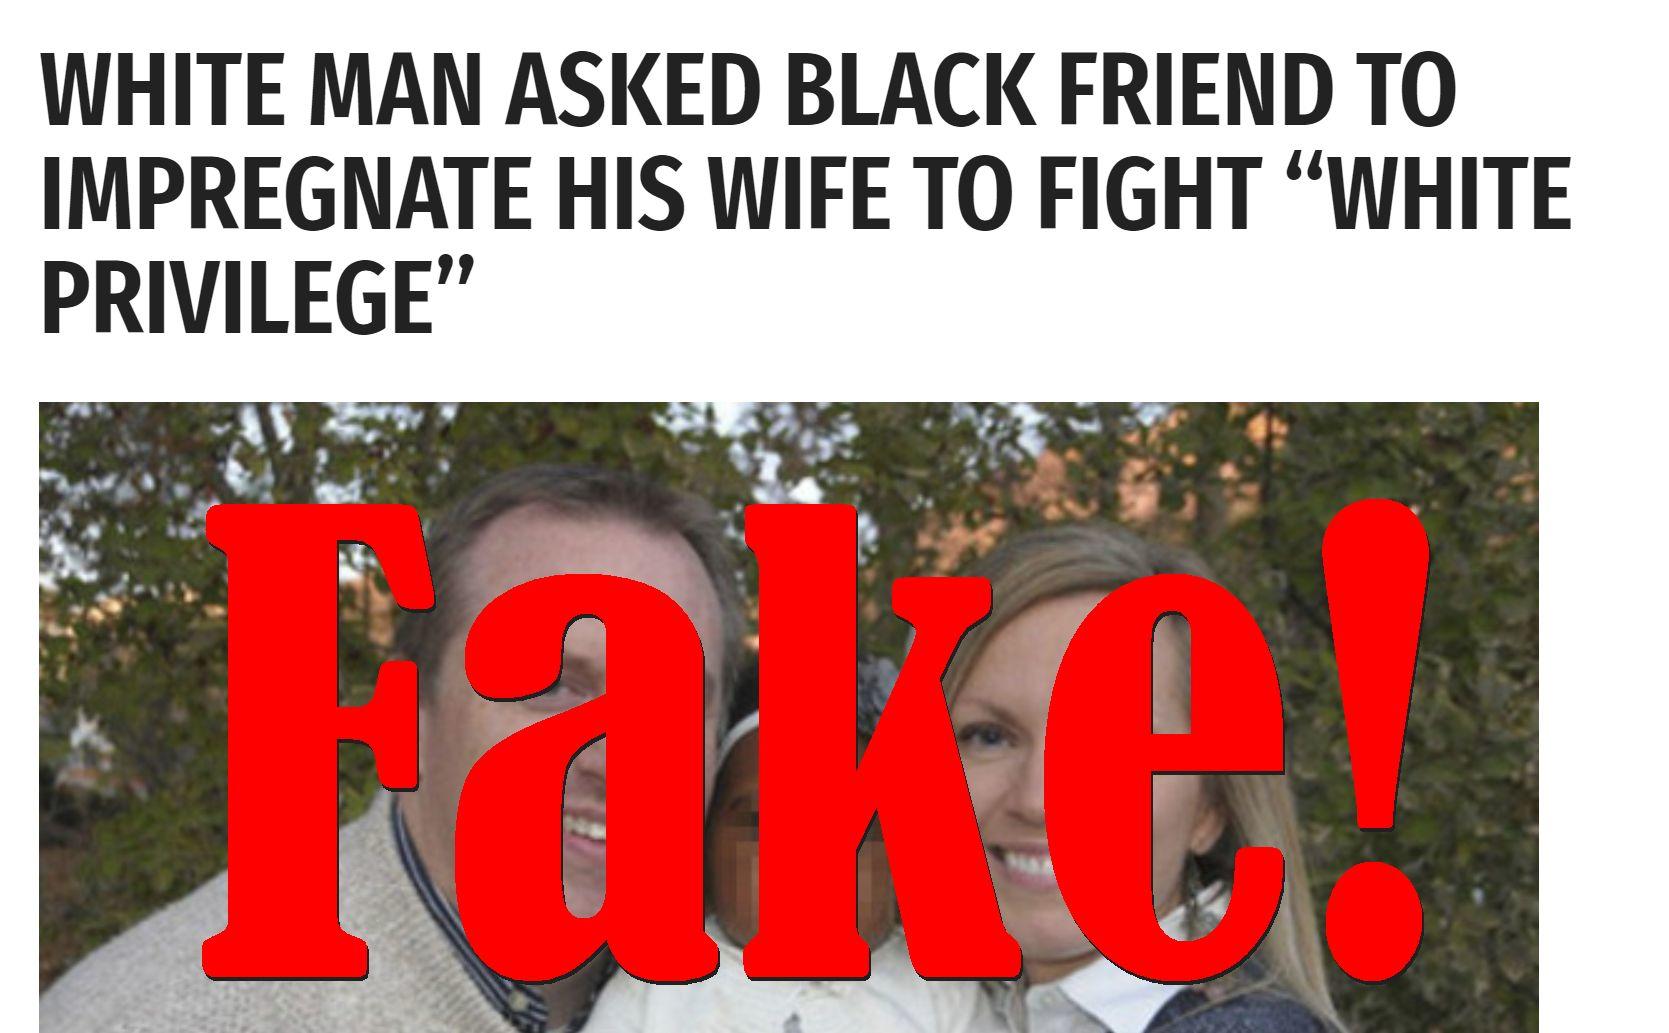 Fake News White Man Did Not Ask Black Friend To Impregnate His Wife To Fight White Privilege